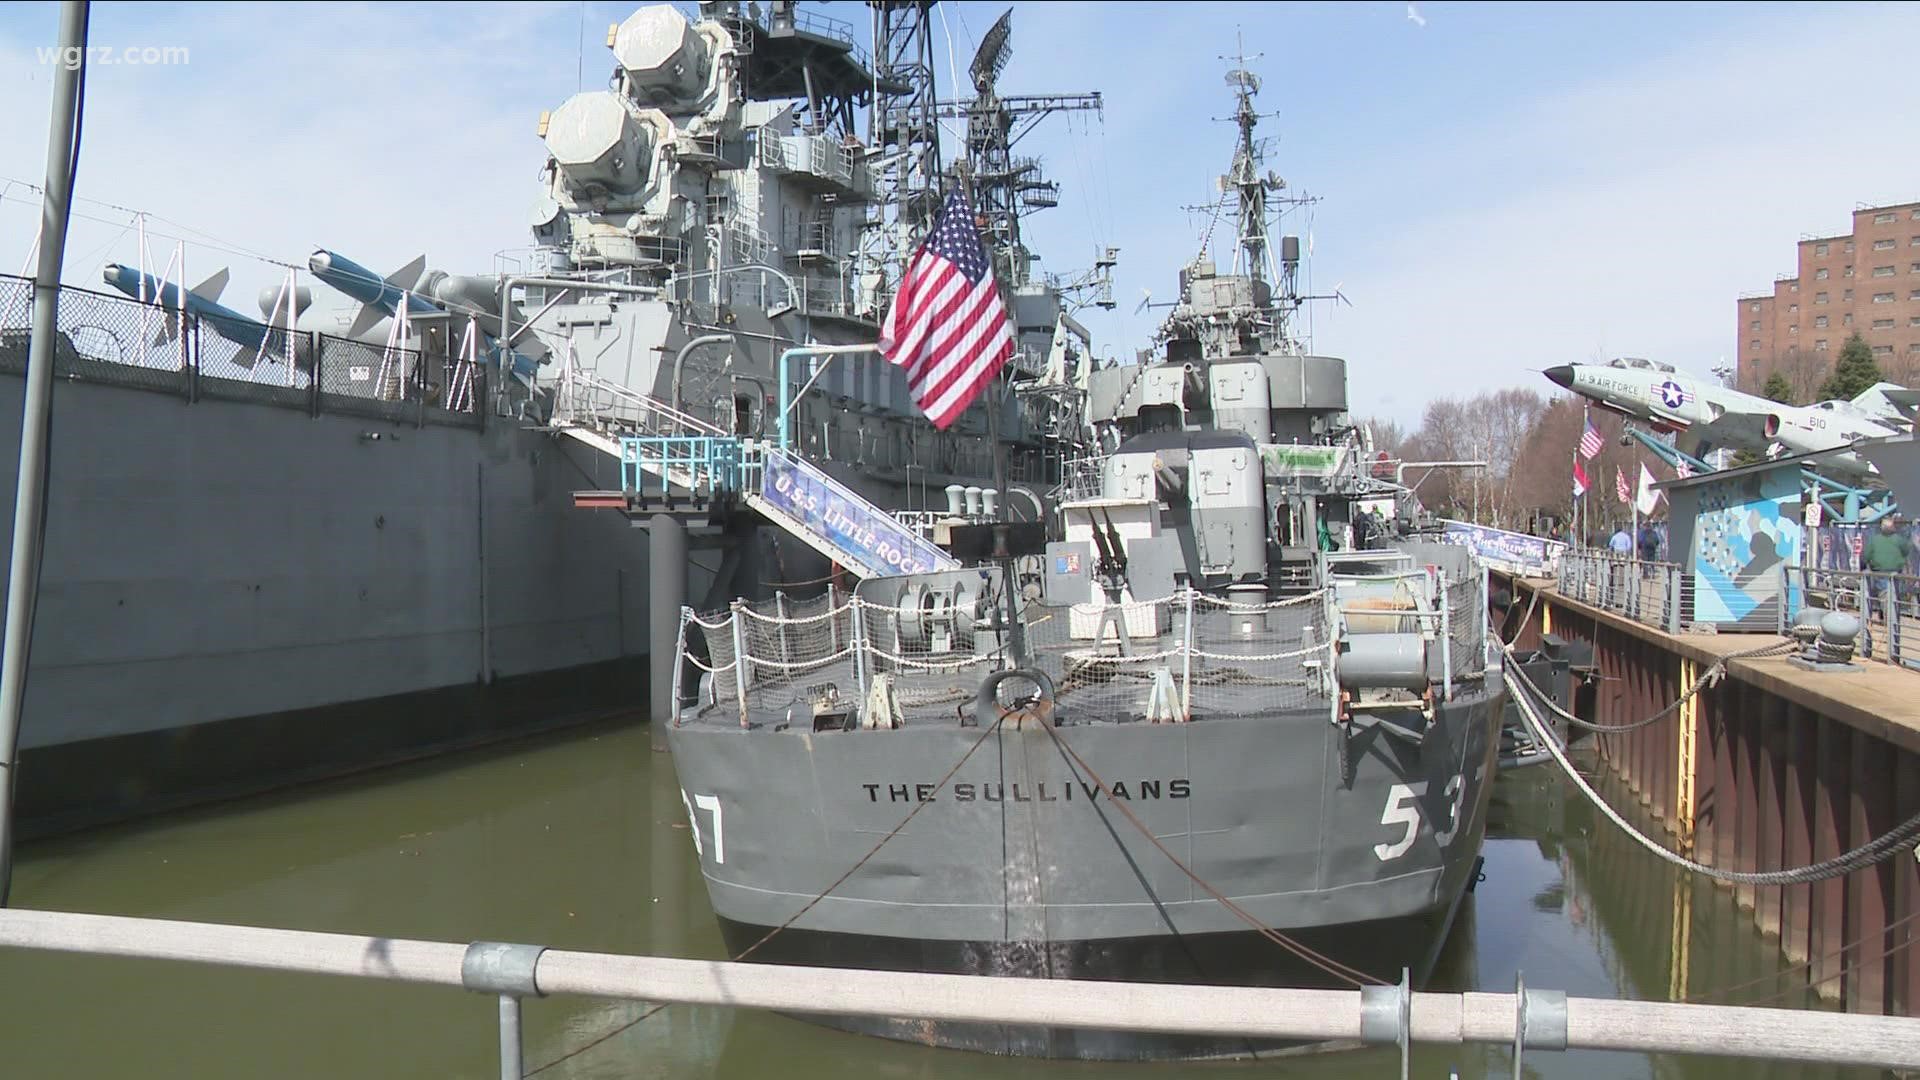 Half A Million Dollars Secured To Repair And Maintain The USS The Sullivans